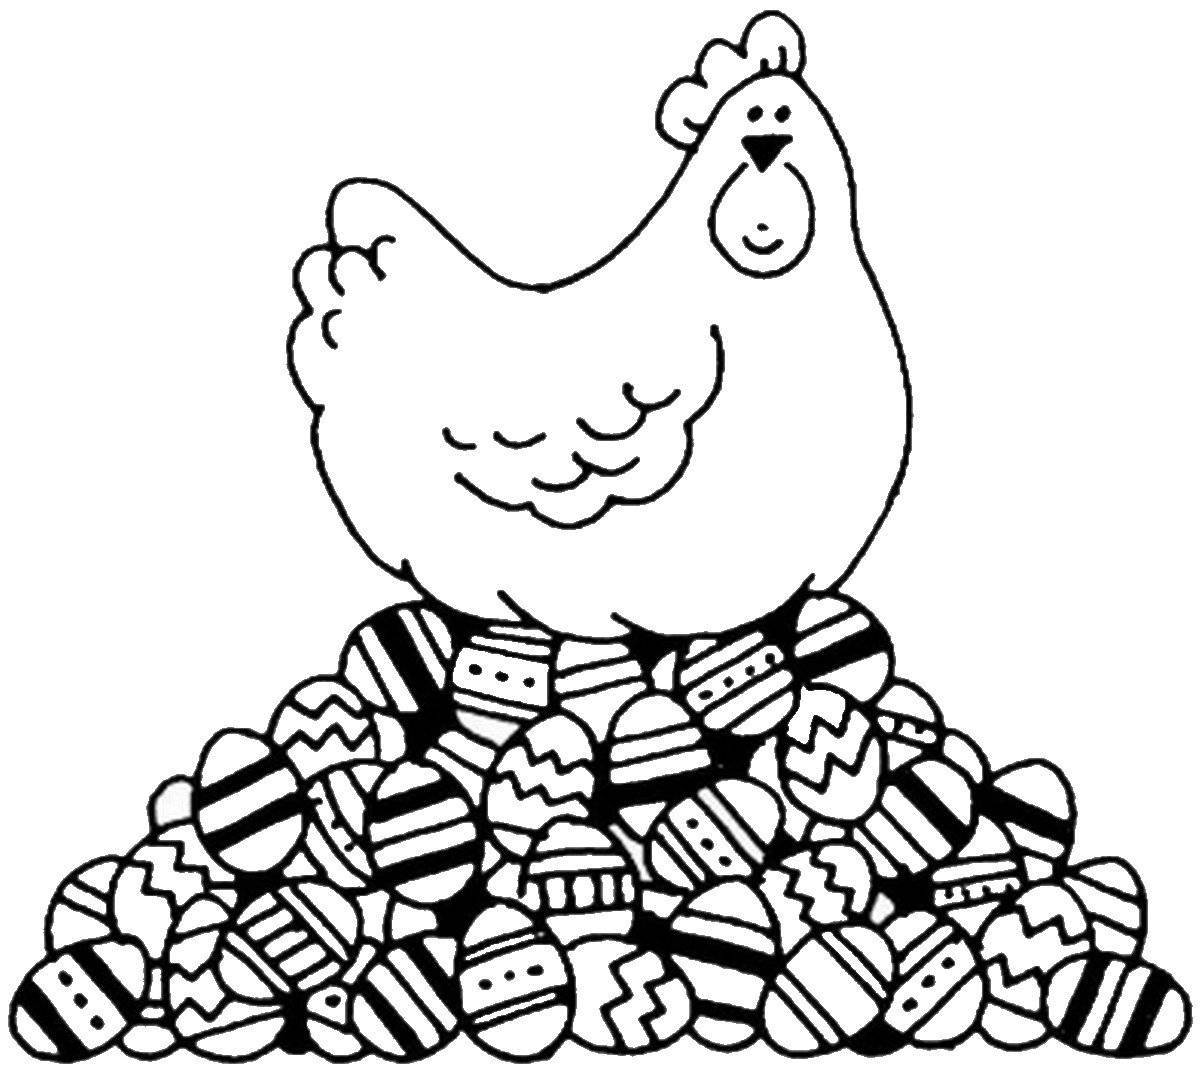 Amazing chicken coloring pages for kids